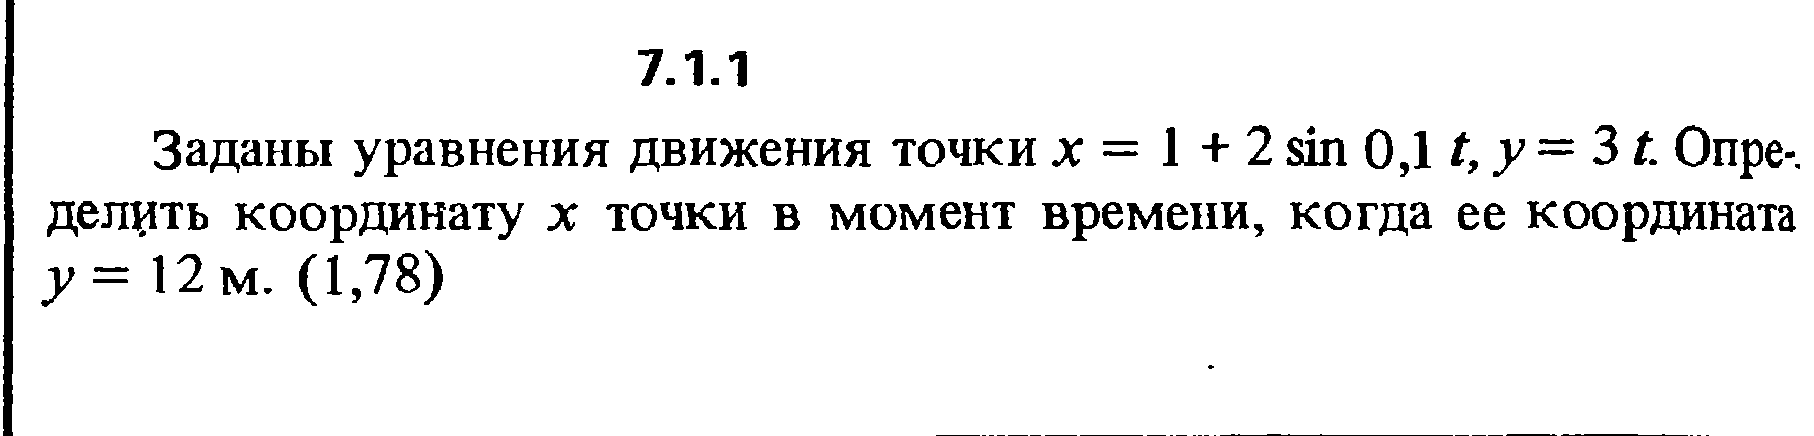 7.1.1 The solution of the problem of the collection of